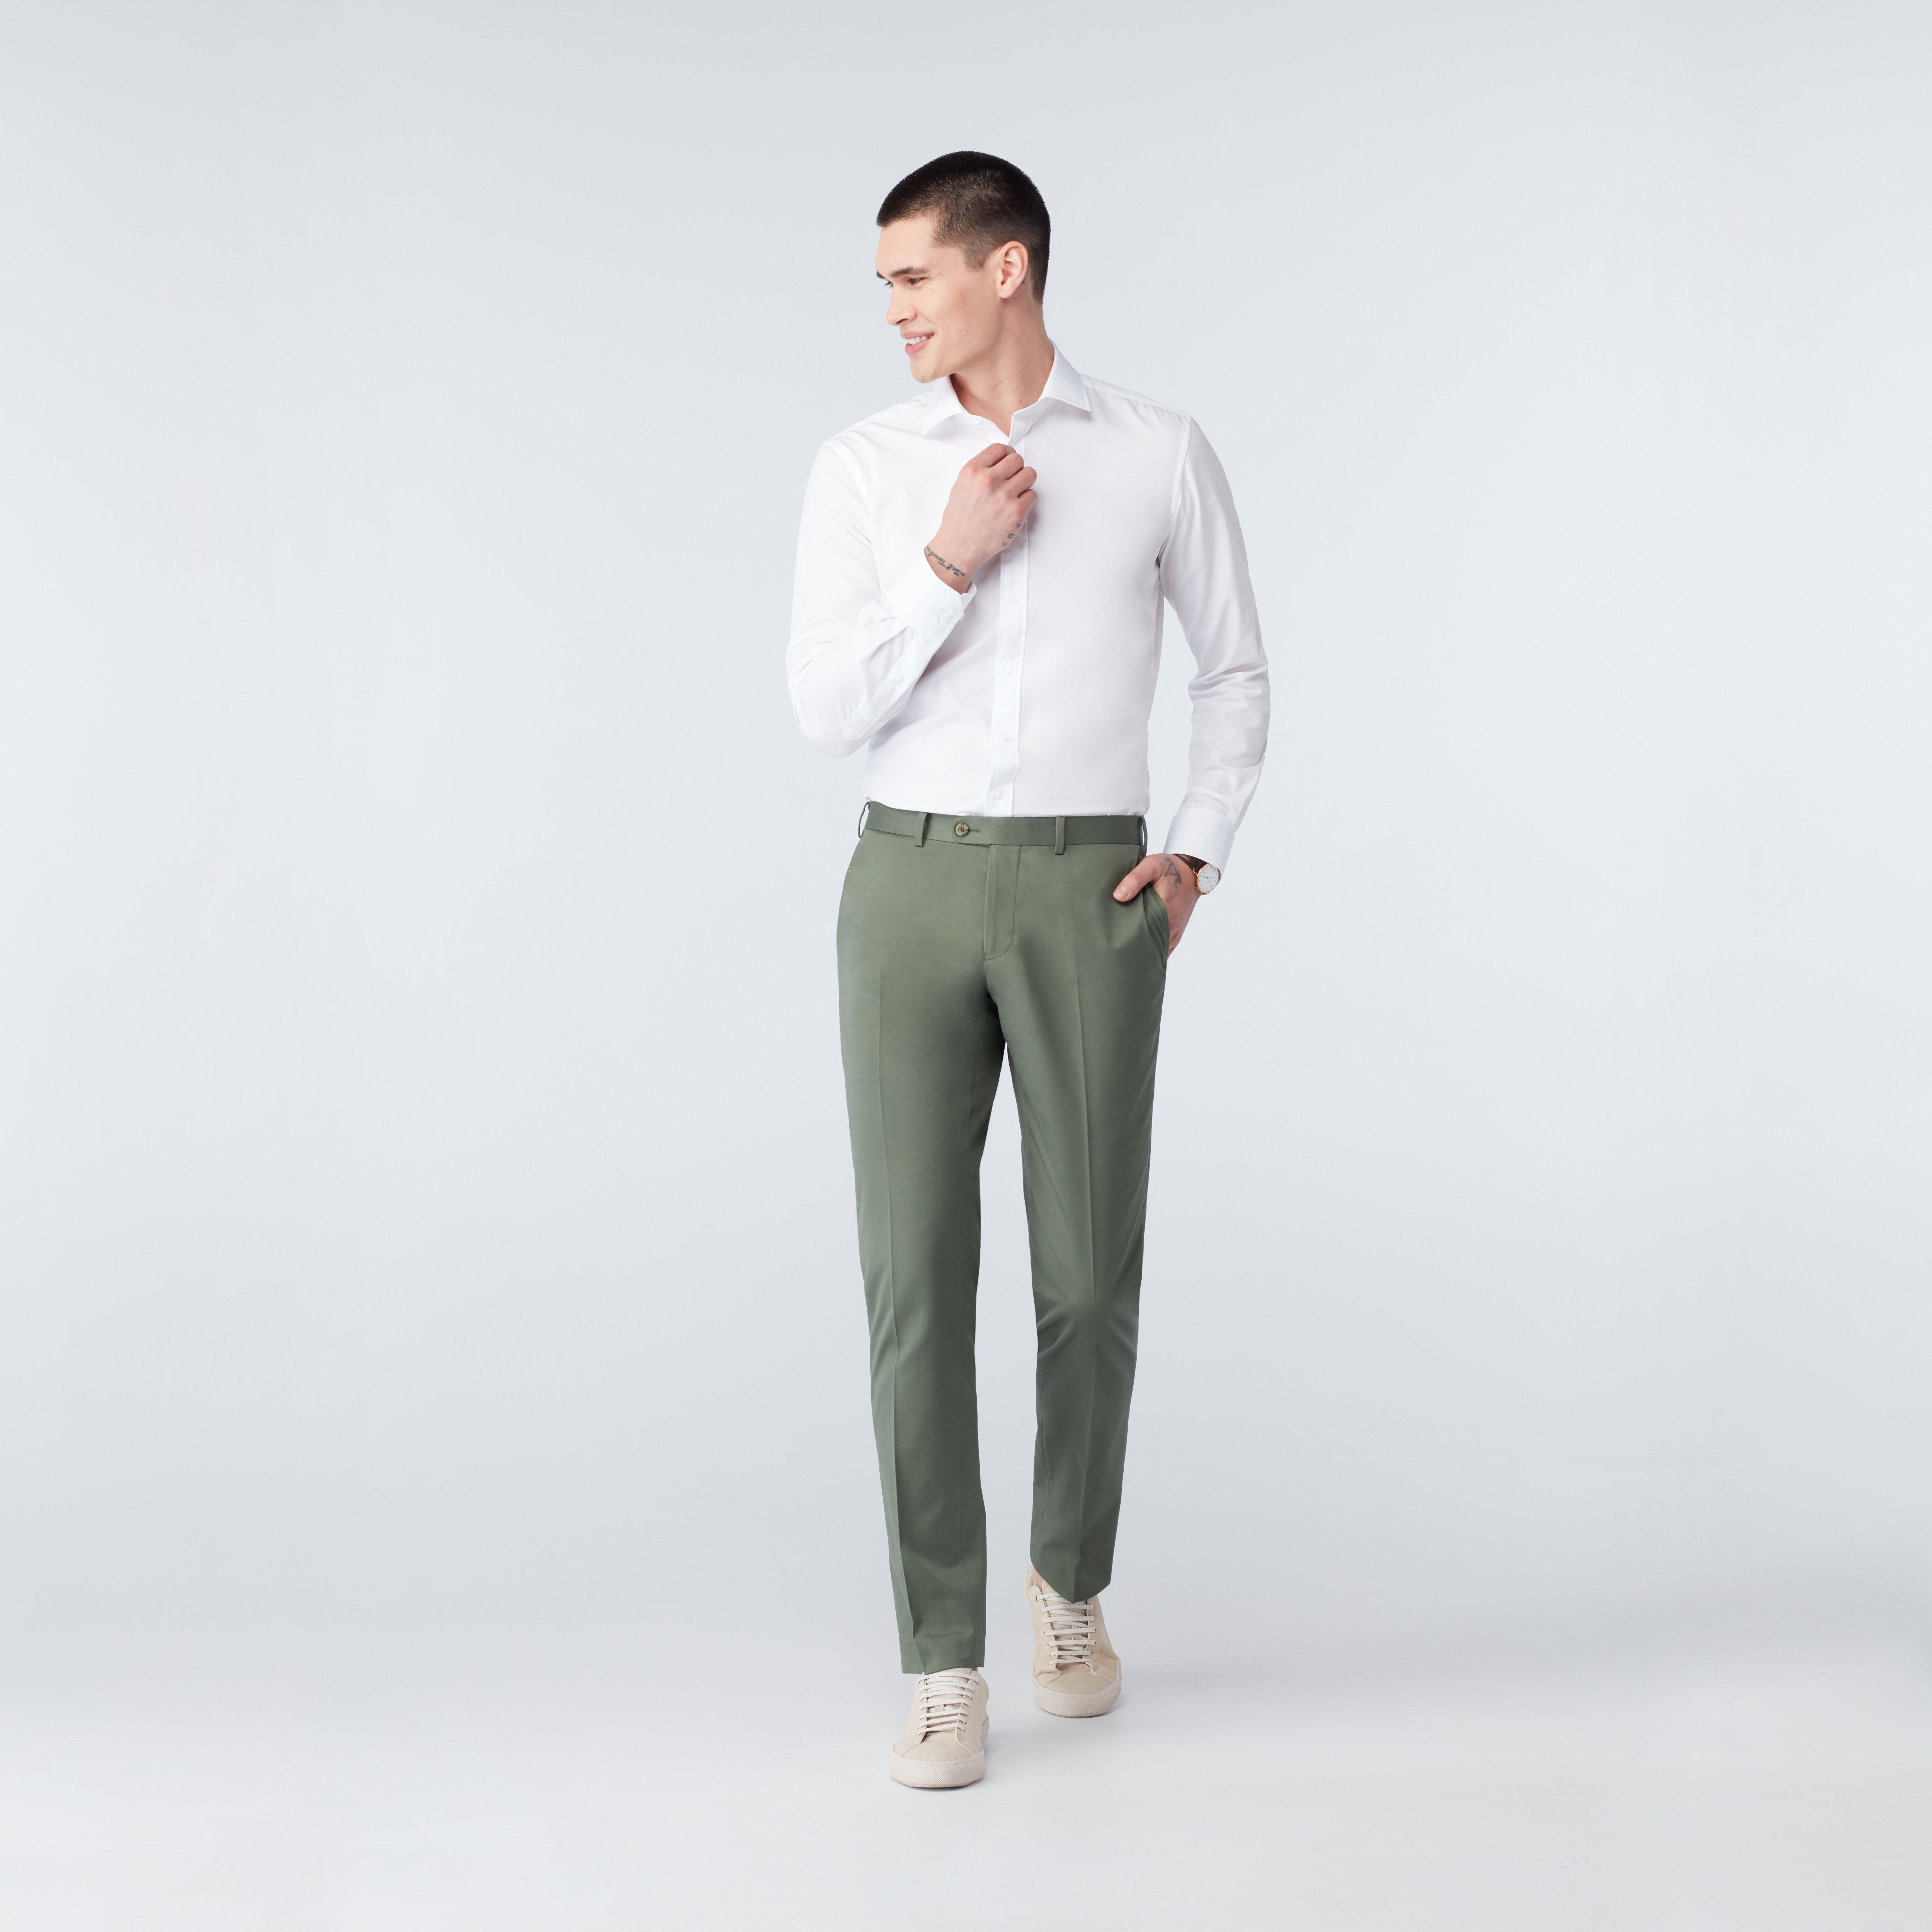 Custom Pants Made For You - Hartley Cotton Stretch Olive Pants | INDOCHINO